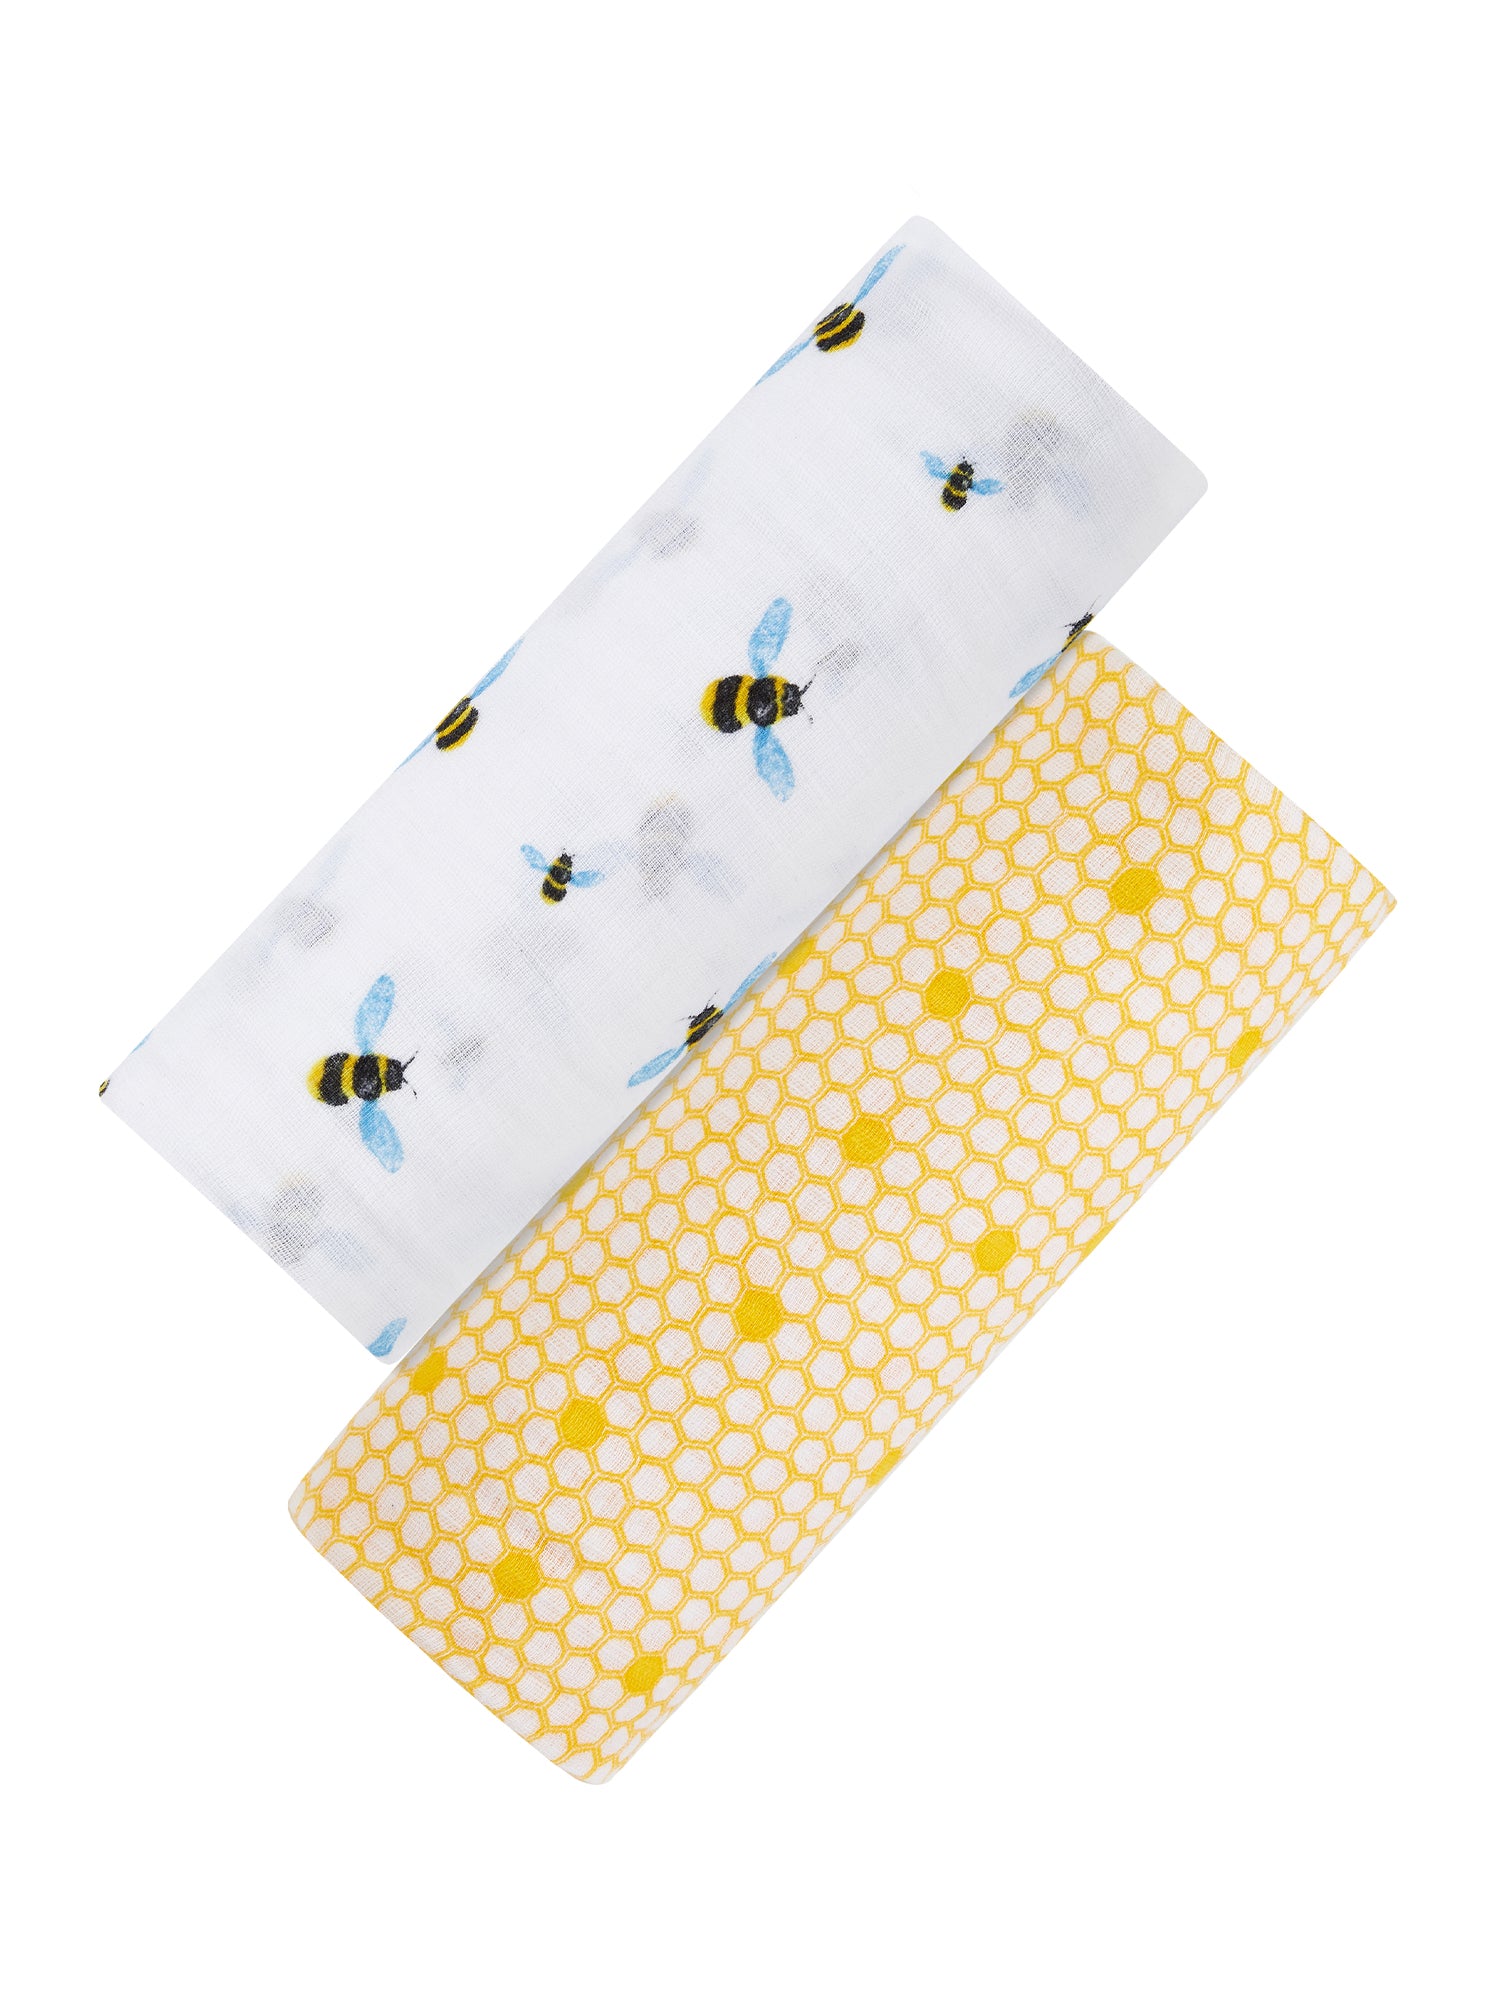 Organic Swaddle Set - Busy Bees (Bee & Hive)